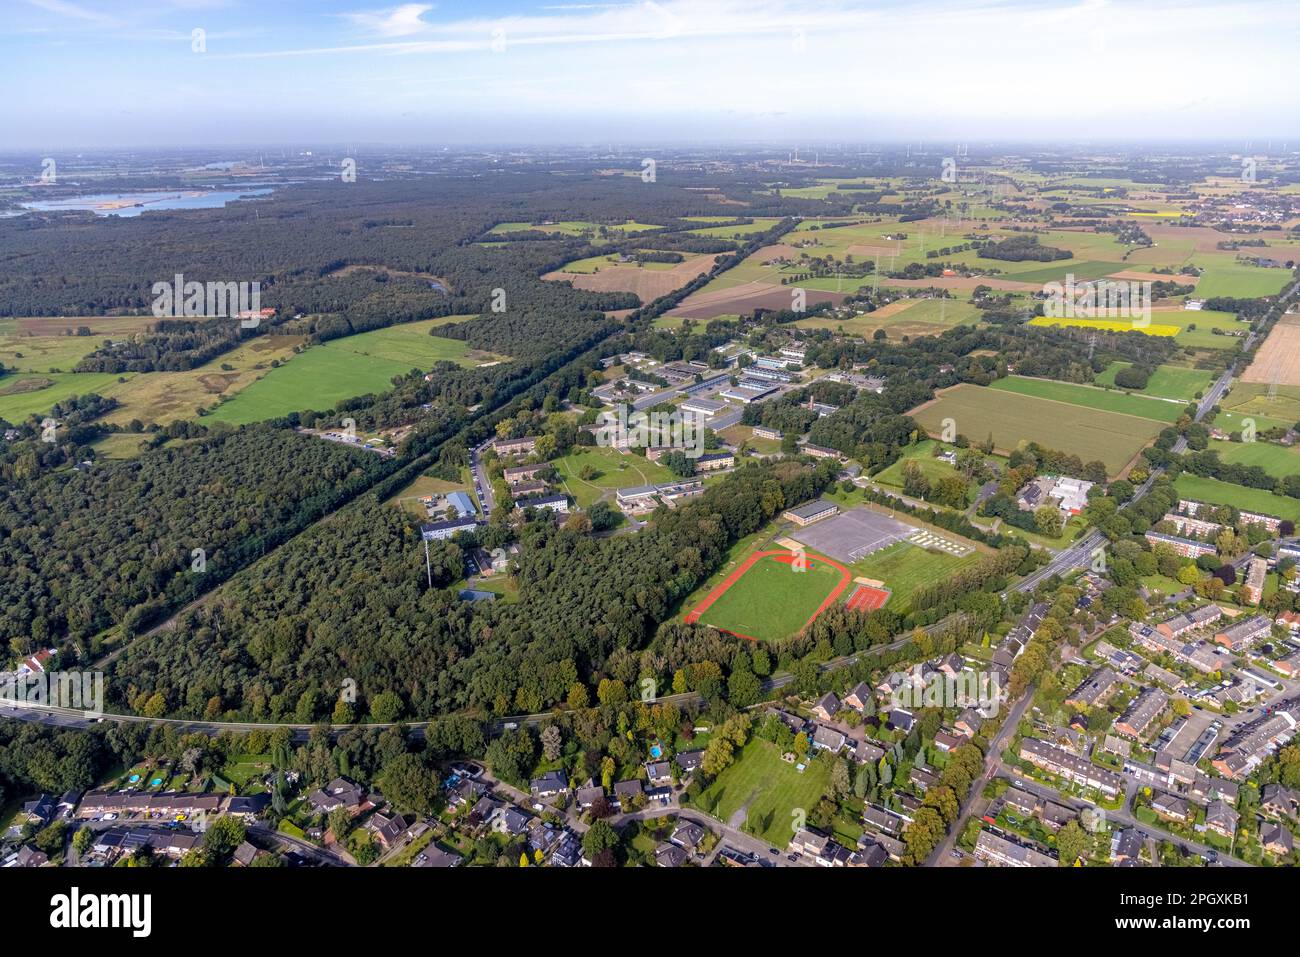 Aerial view, Schill barracks with sports field in the district Blumenkamp in Wesel, Lower Rhine, North Rhine-Westphalia, Germany, DE, Europe, soccer f Stock Photo